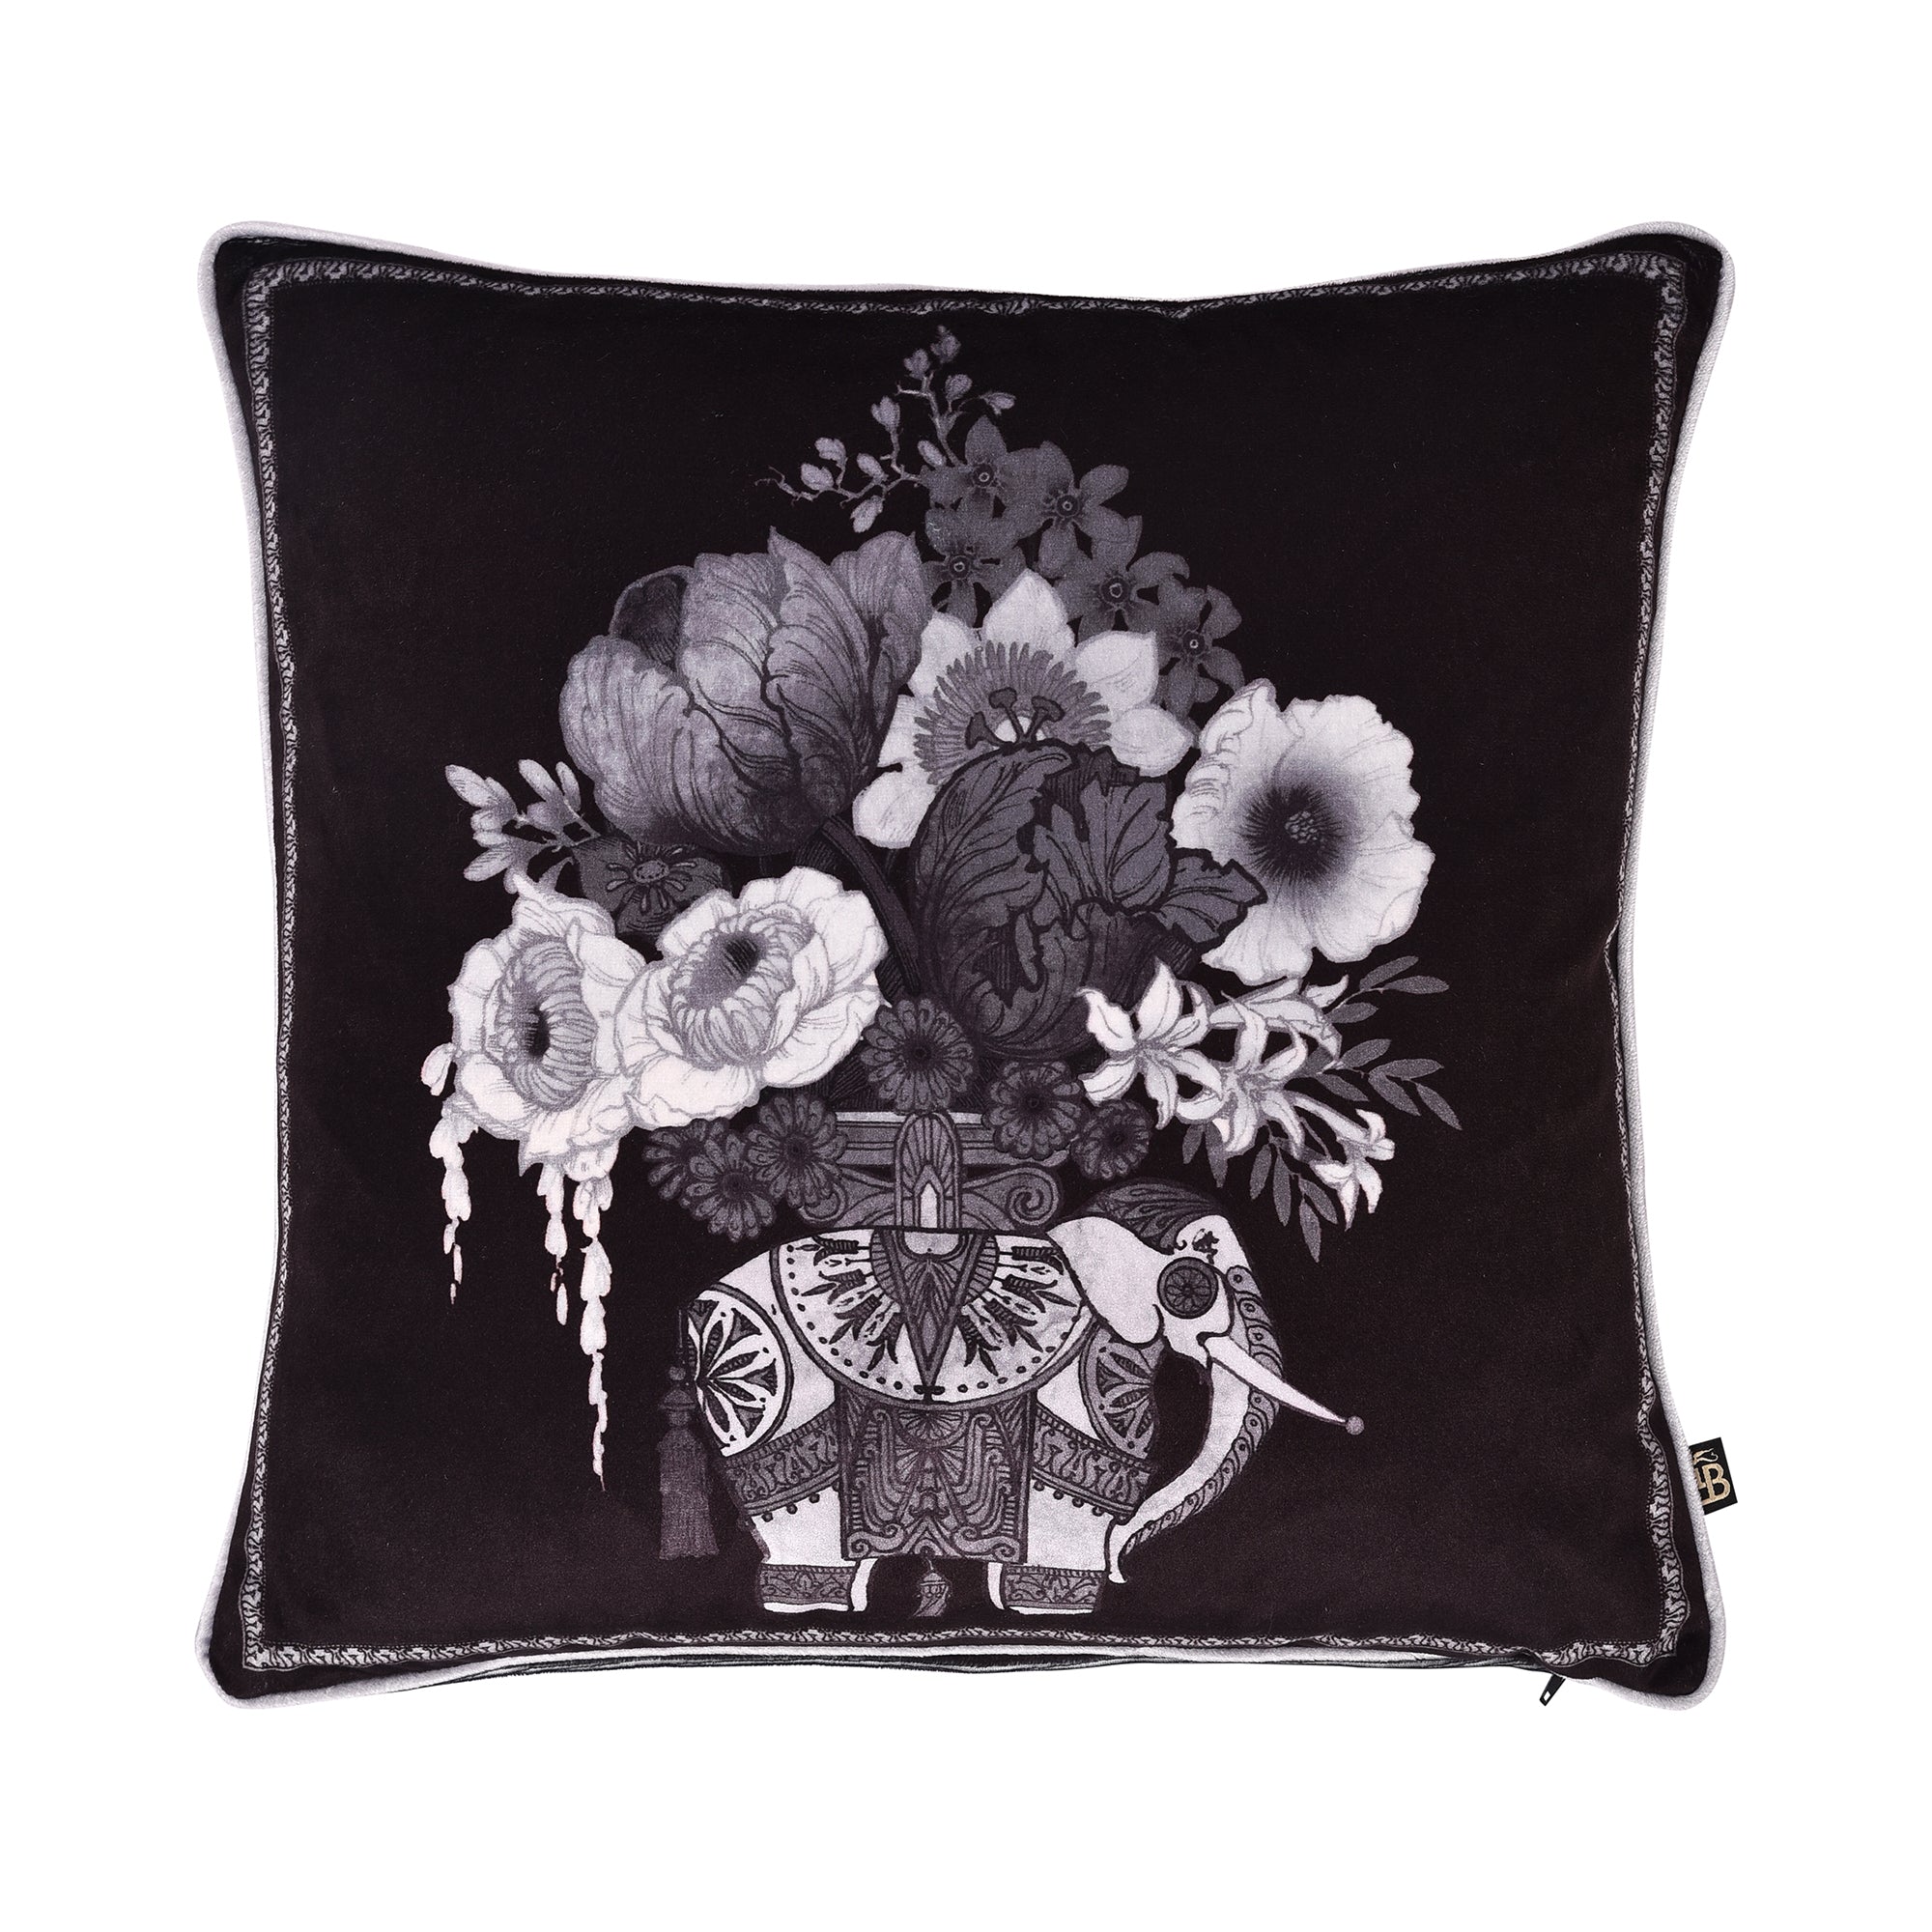 Cushion Cover Generou Elephant by Laurence Llewelyn-Bowen in Black/White